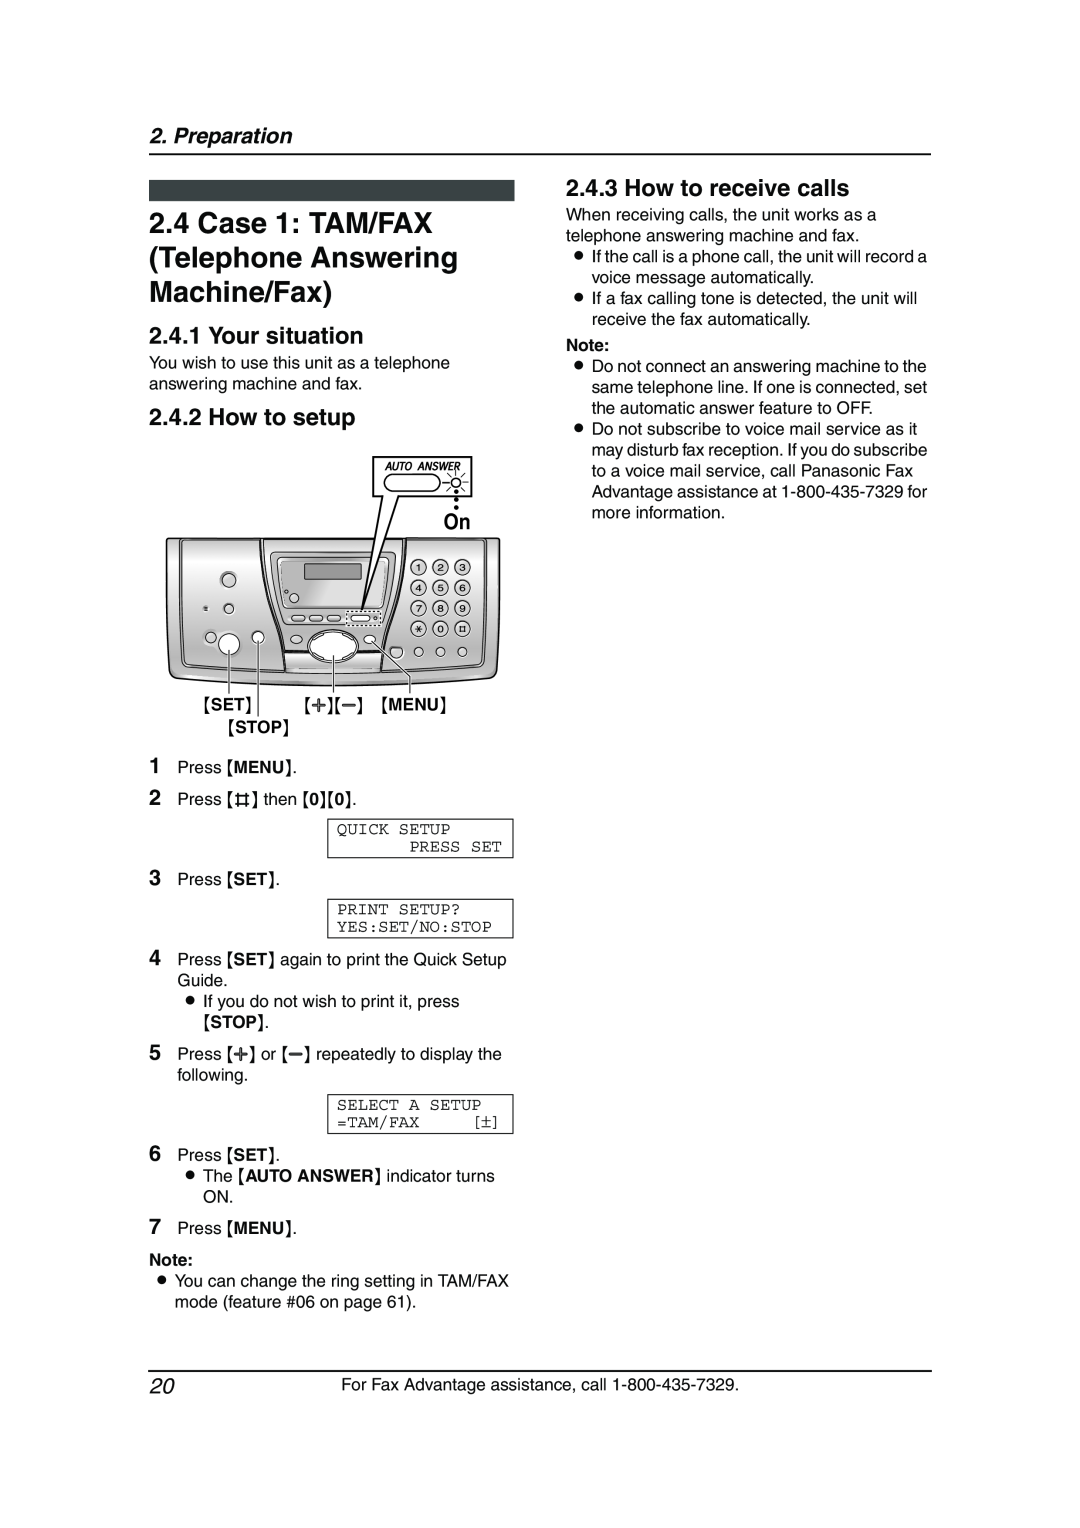 Panasonic KX-FPG376 Case 1 TAM/FAX Telephone Answering Machine/Fax, Your situation, How to setup, How to receive calls 